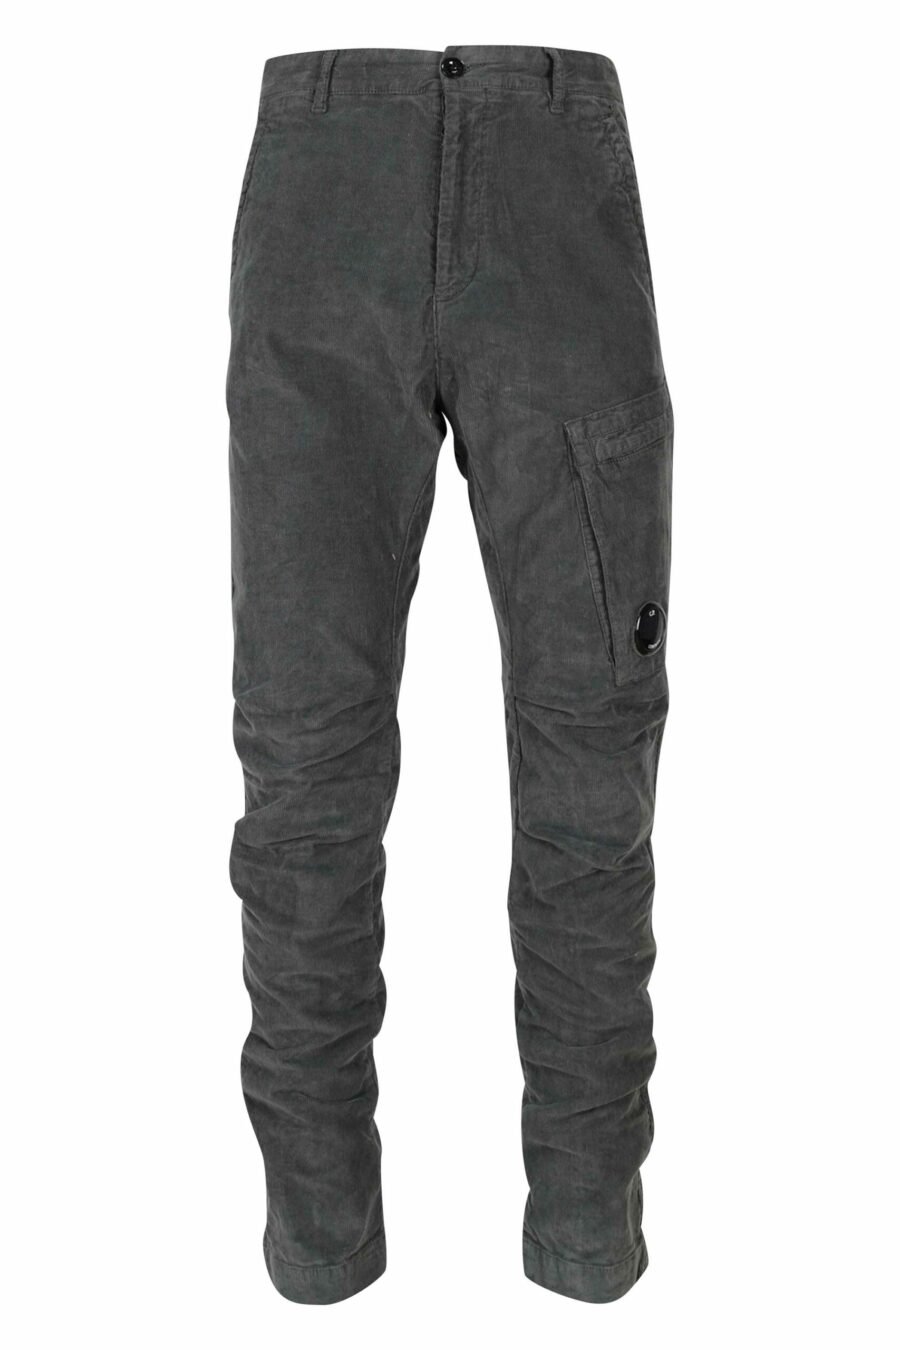 Grey corduroy trousers with side pocket and lens logo - 7620943650693 8 1 scaled